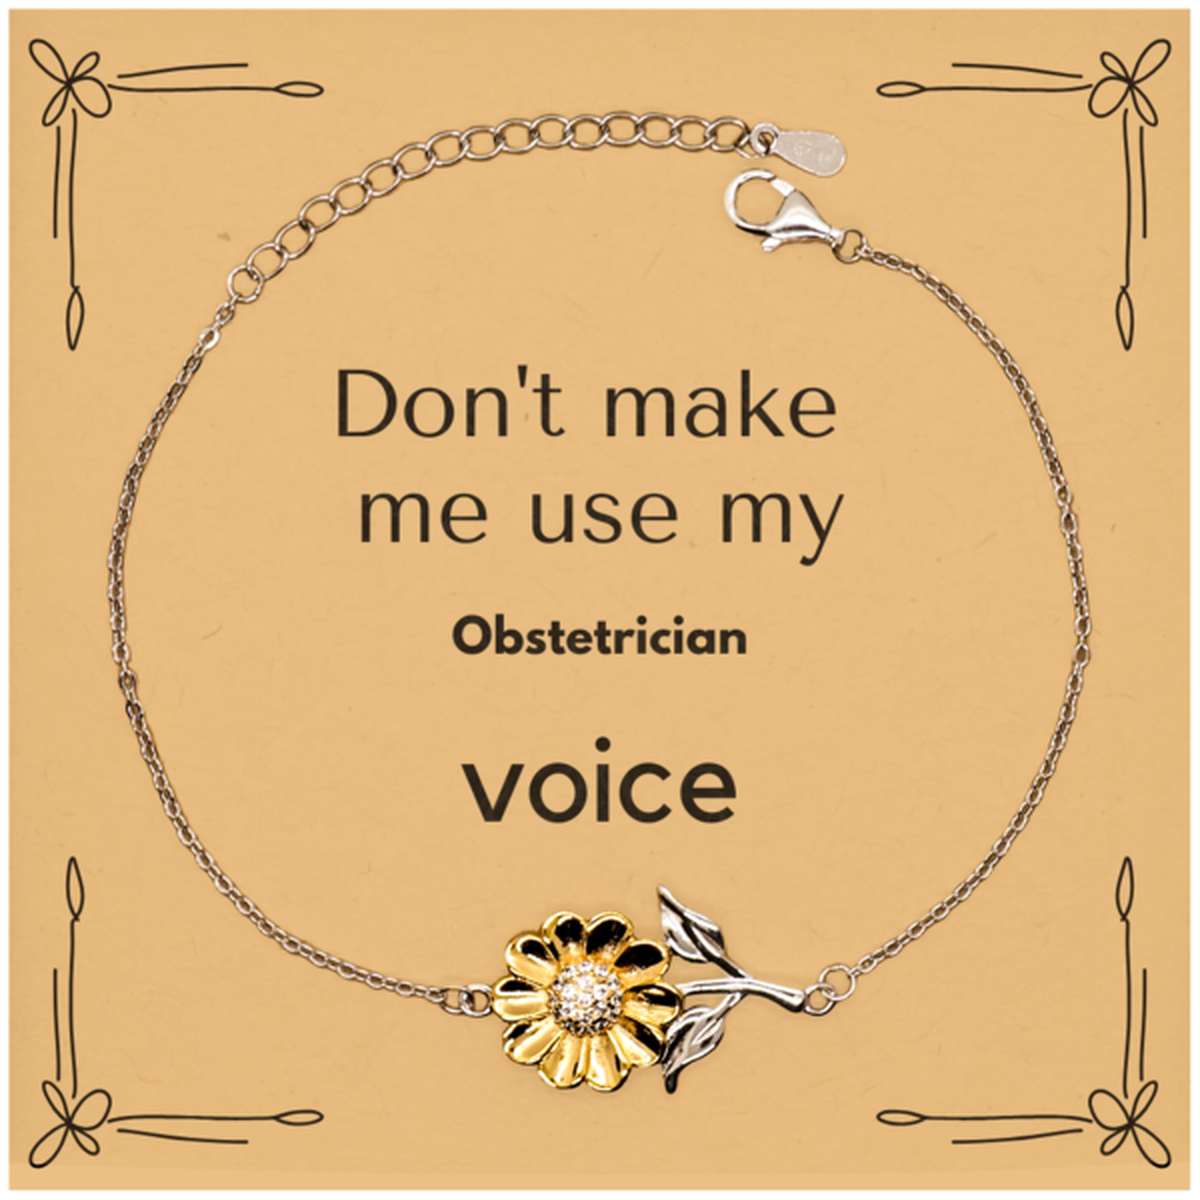 Don't make me use my Obstetrician voice, Sarcasm Obstetrician Card Gifts, Christmas Obstetrician Sunflower Bracelet Birthday Unique Gifts For Obstetrician Coworkers, Men, Women, Colleague, Friends